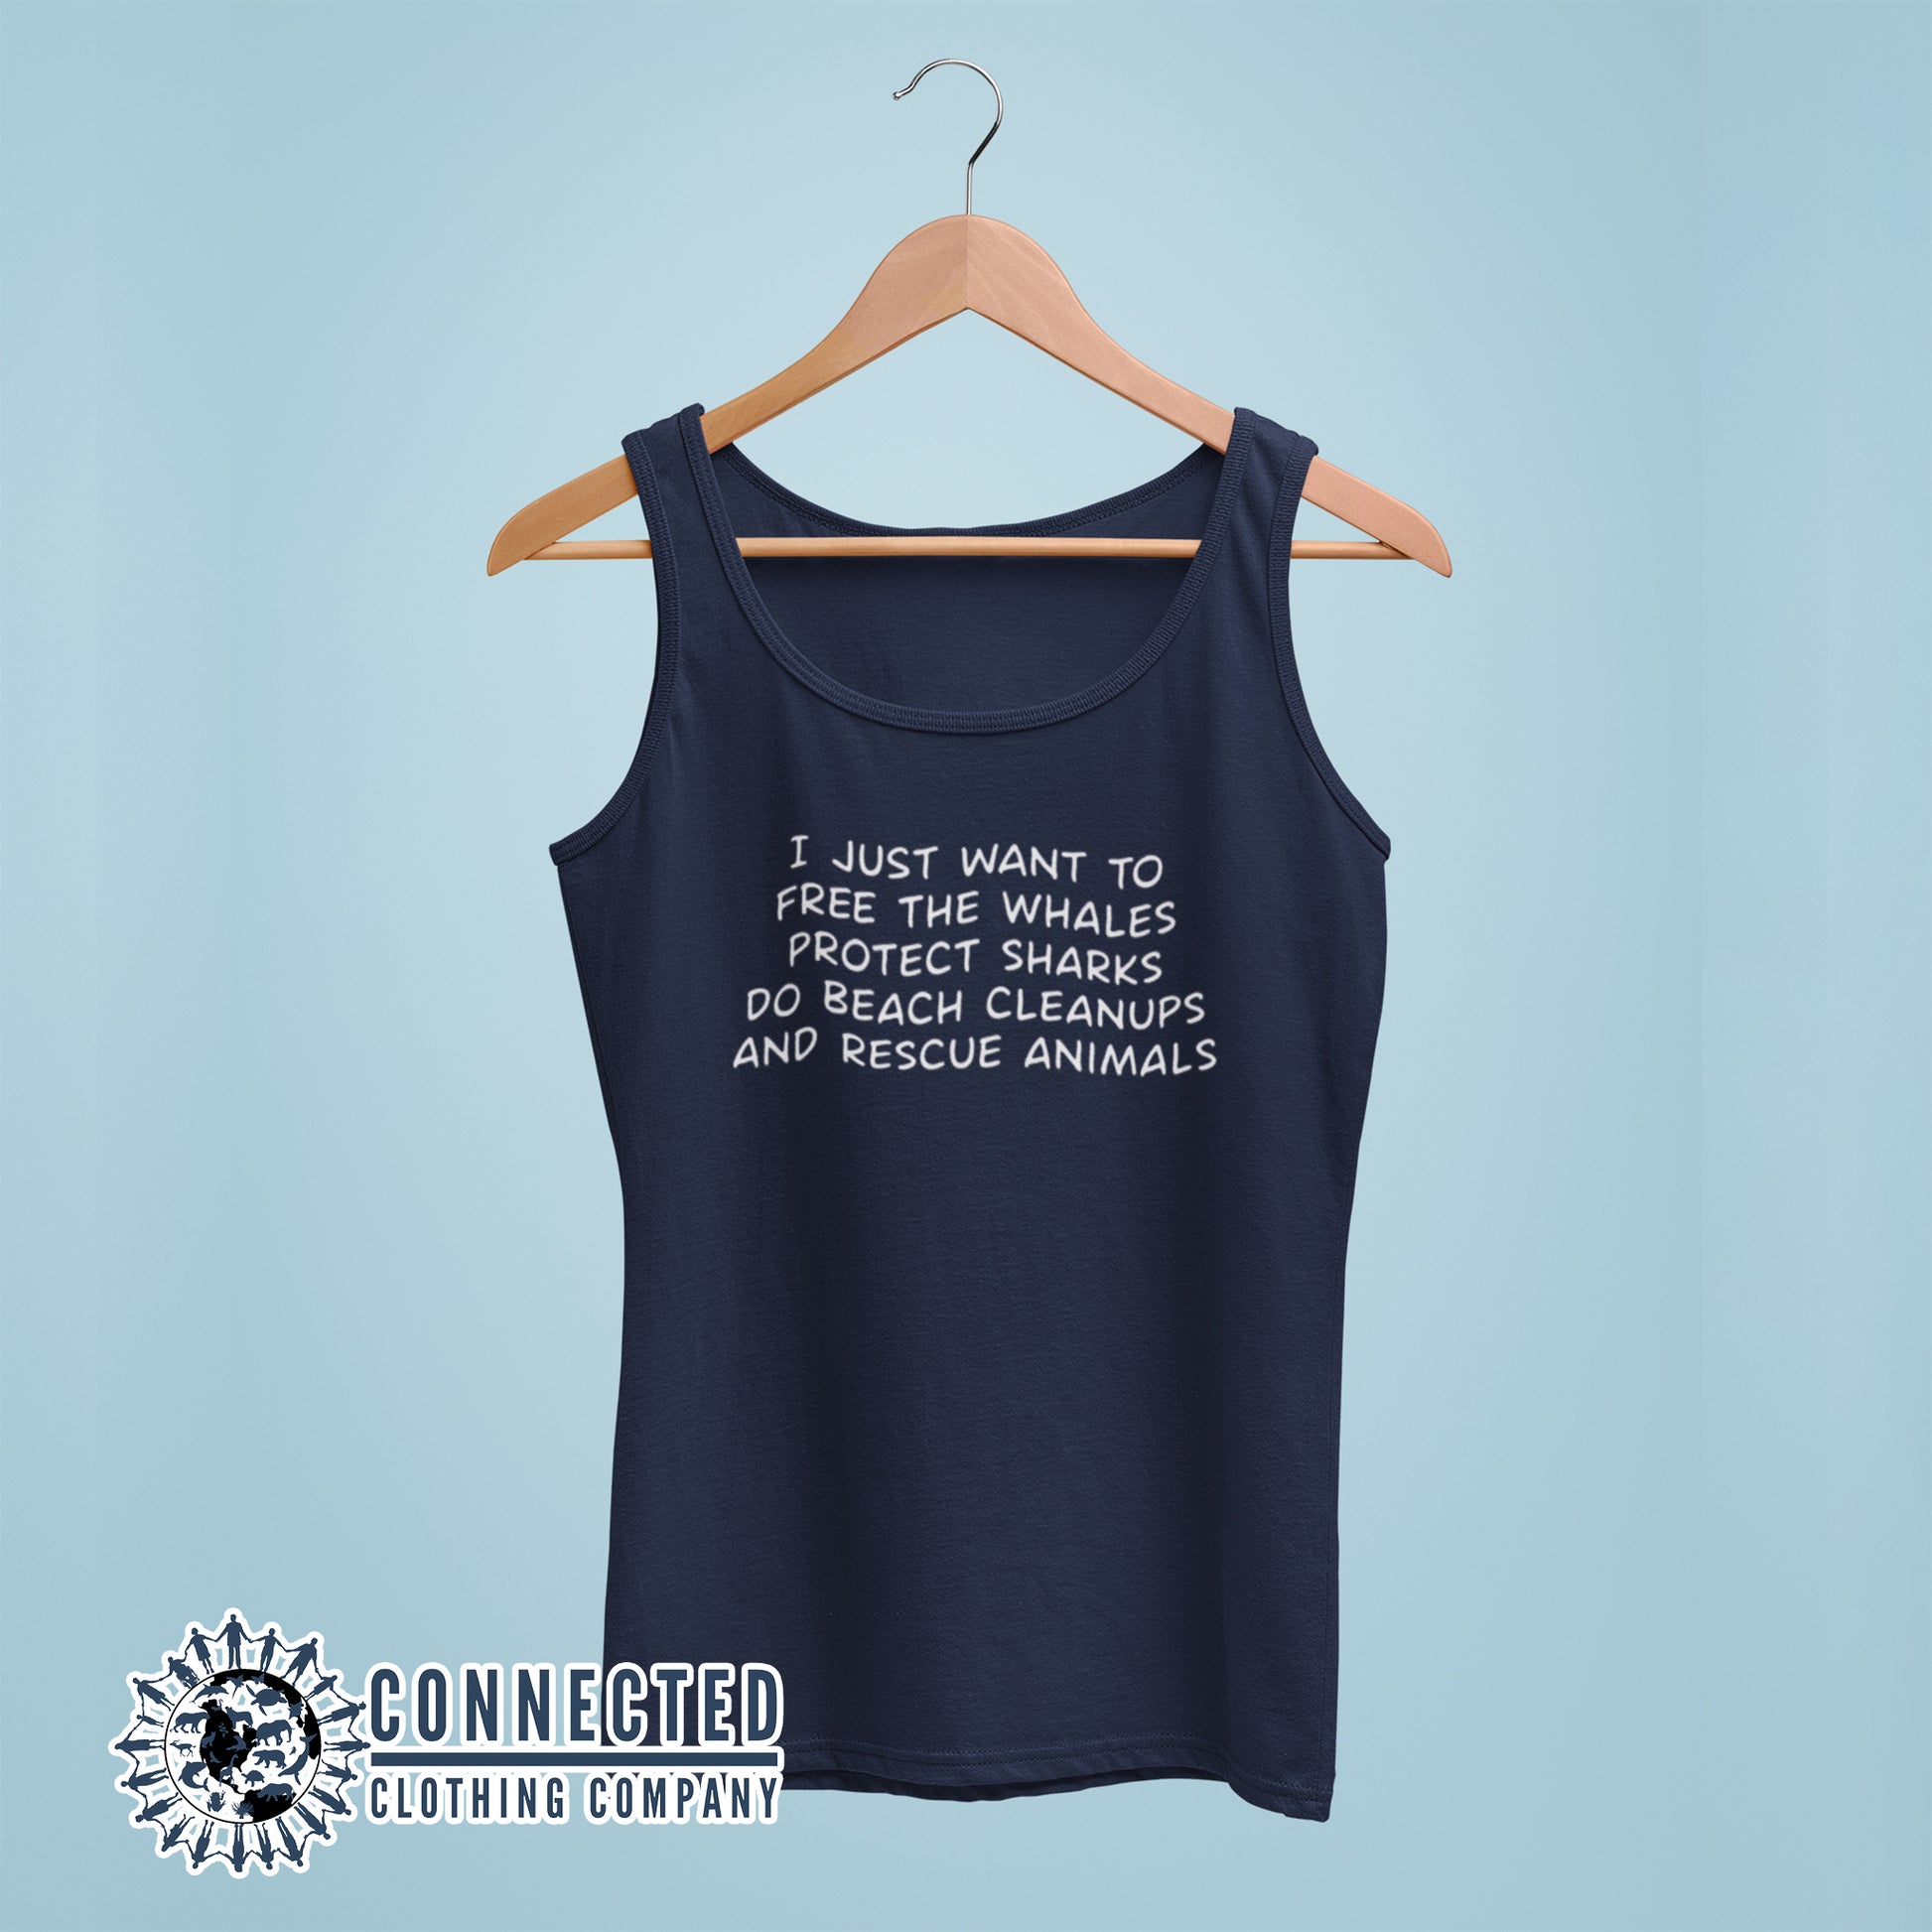 Navy Blue I Just Want To Save The World Women's Tank Top reads "I just want to free the whales, protect sharks, do beach cleanups, and rescue animals" - Connected Clothing Company - 10% of profits donated to Mission Blue ocean conservation